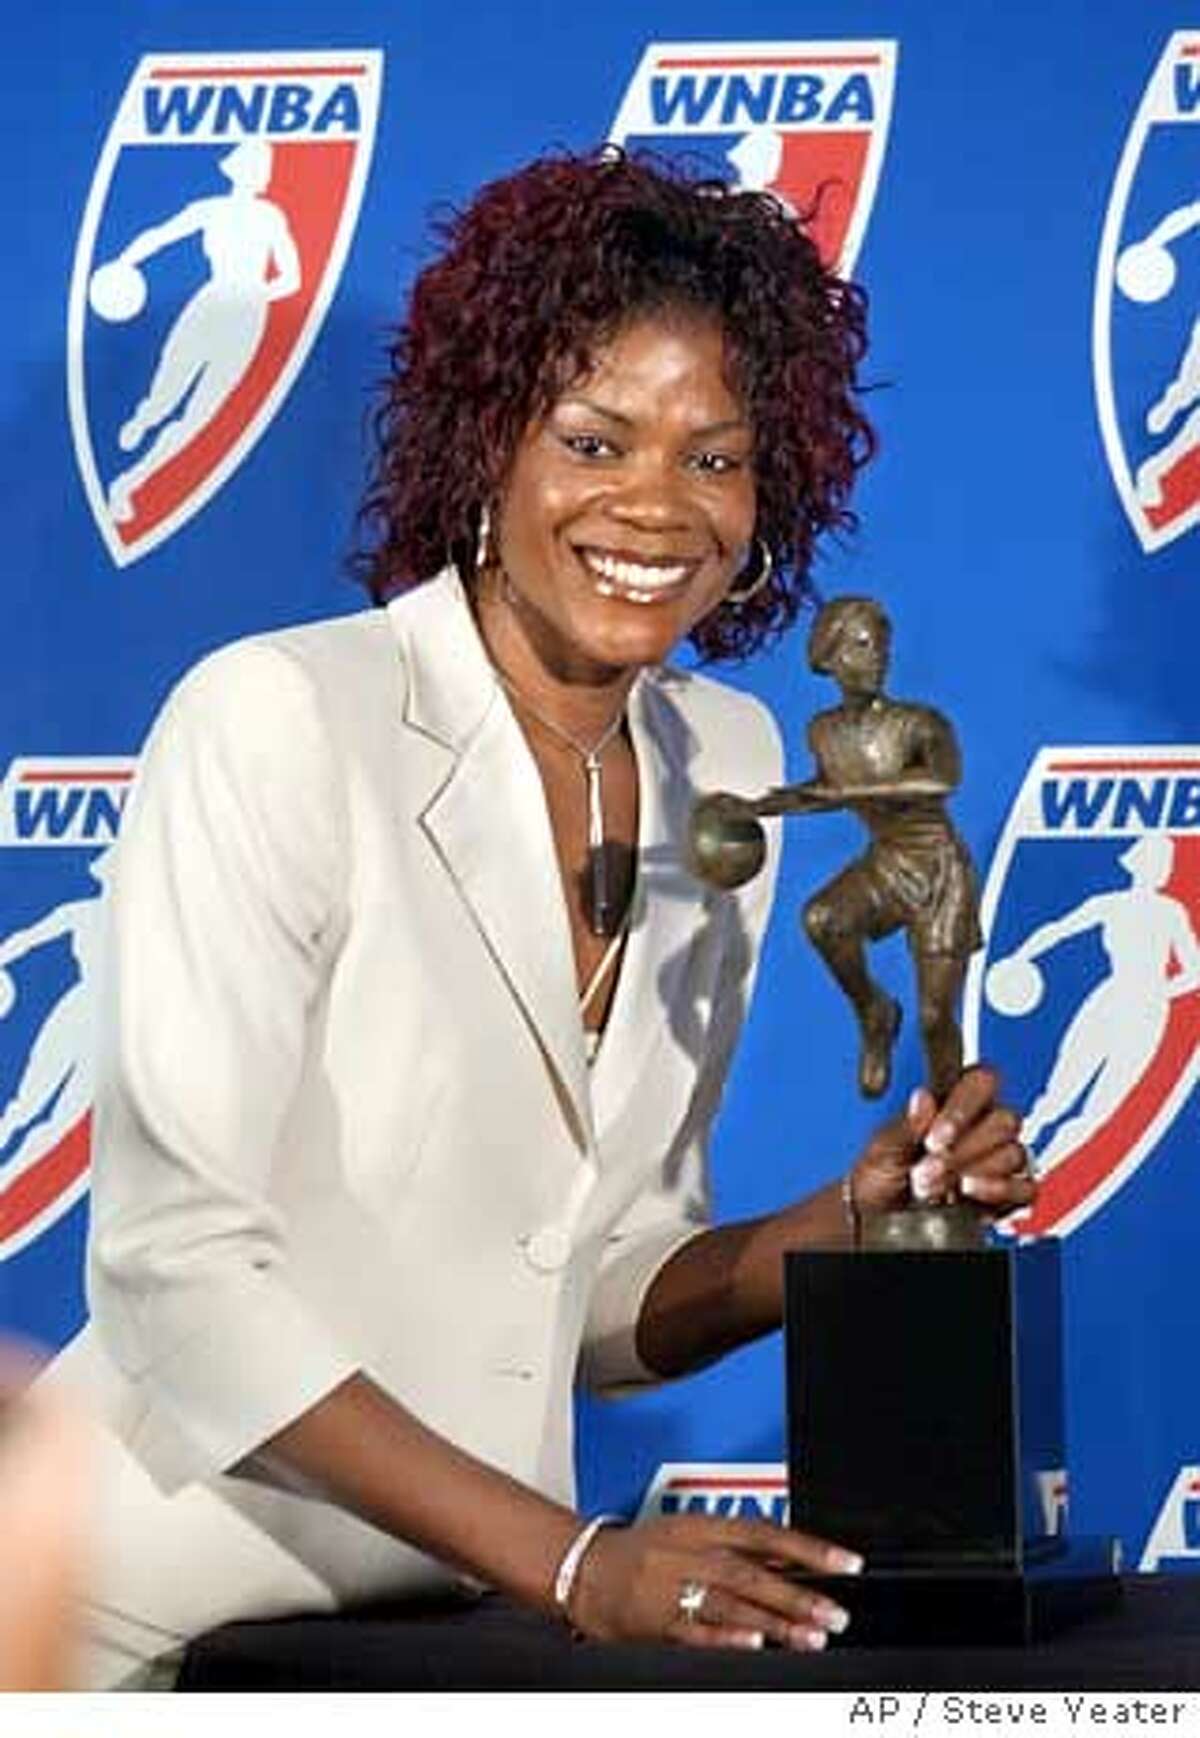 *** FILE *** Sheryl Swoopes poses with the WNBA Most Valuable Player award after receiving the honor for the third time during a news conference in Sacramento, Calif., Sunday, Sept. 18, 2005. Swoopes is opening up about being a lesbian, telling a magazine that she's "tired of having to hide my feelings about the person I care about." Swoopes, honored last month as the WNBA's Most Valuable Player, told ESPN The Magazine for a story on newsstands Wednesday Oct. 26, 2005 that she didn't always know she was gay and fears that coming out could jeopardize her status as a role model. (AP Photo/Steve Yeater)